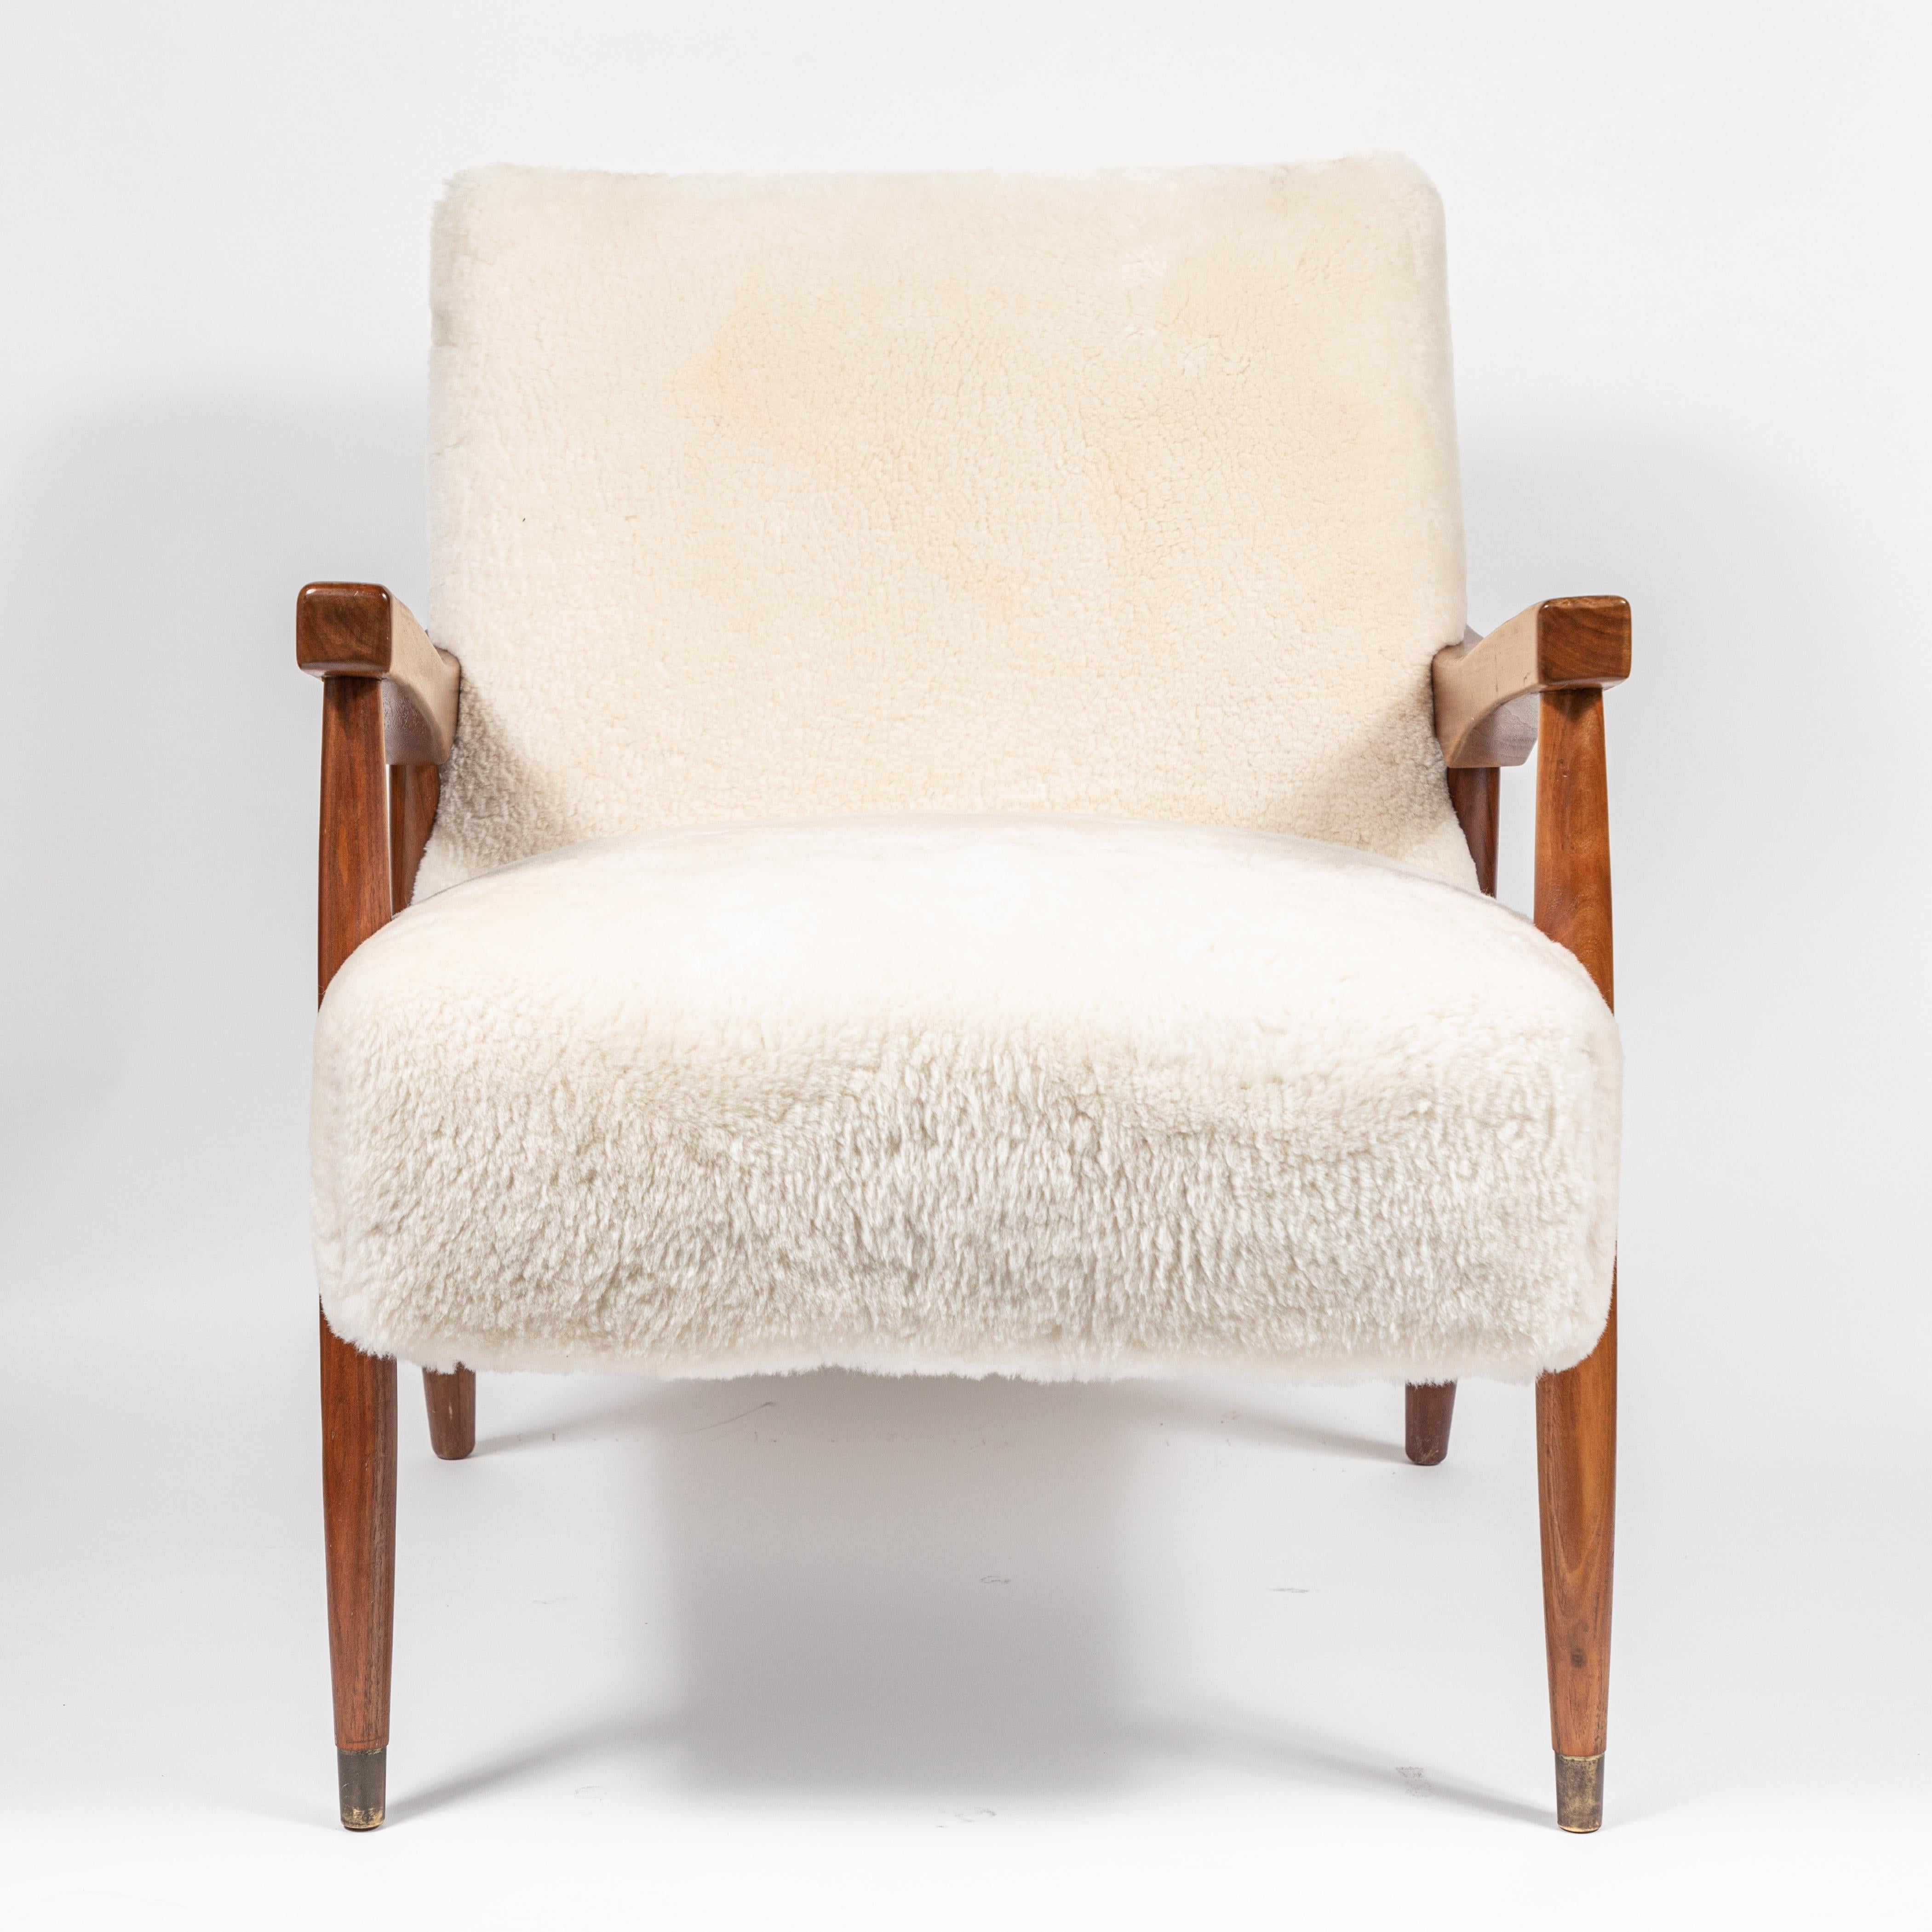 A beautiful, wooden sculptural mid century occasional chair that has been newly upholstered in white shearling and the wood has been newly refinished.

Featuring beautiful sculptural arms and interesting angles, a standout in any room.